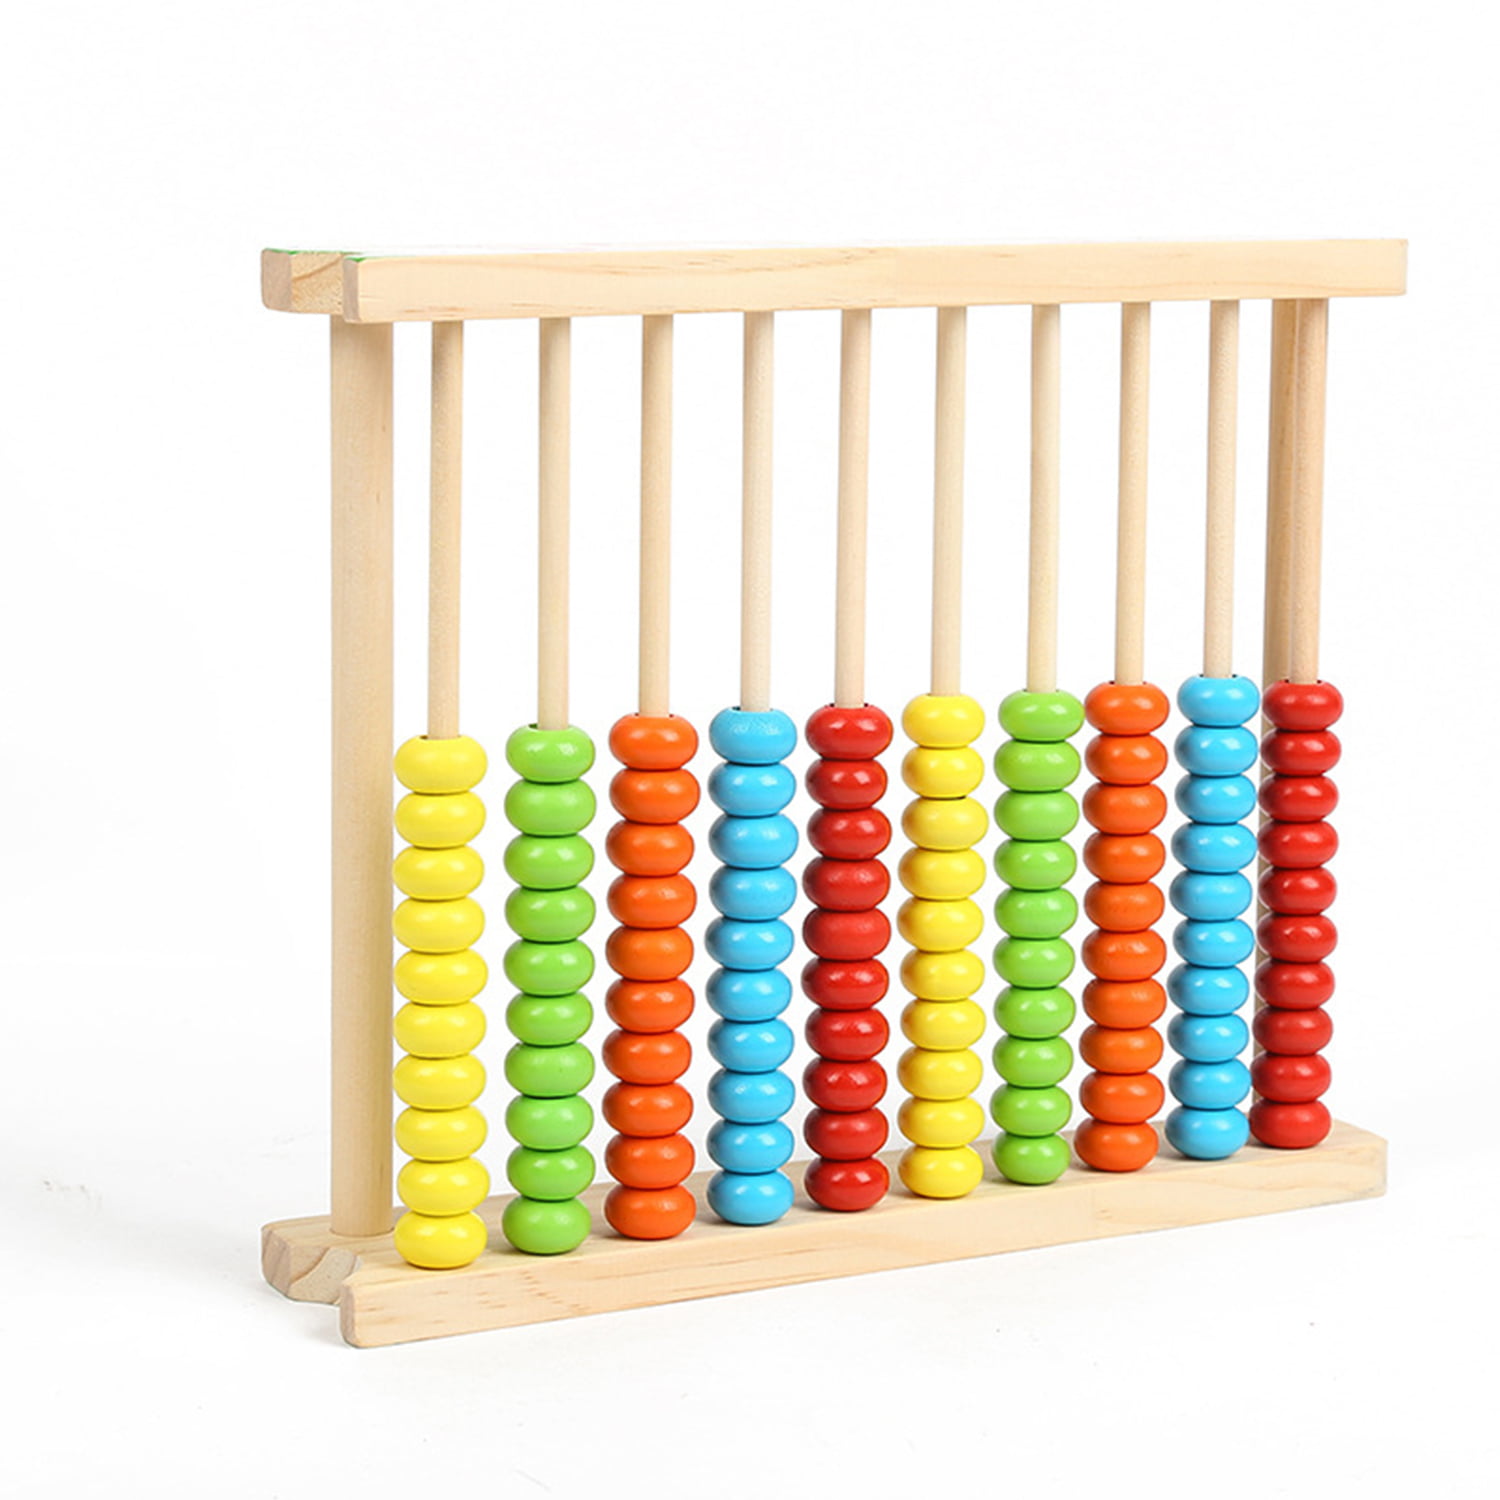 Wooden Bead Bar Number Counting Toys for Preschool Infant Kids Early Learning 